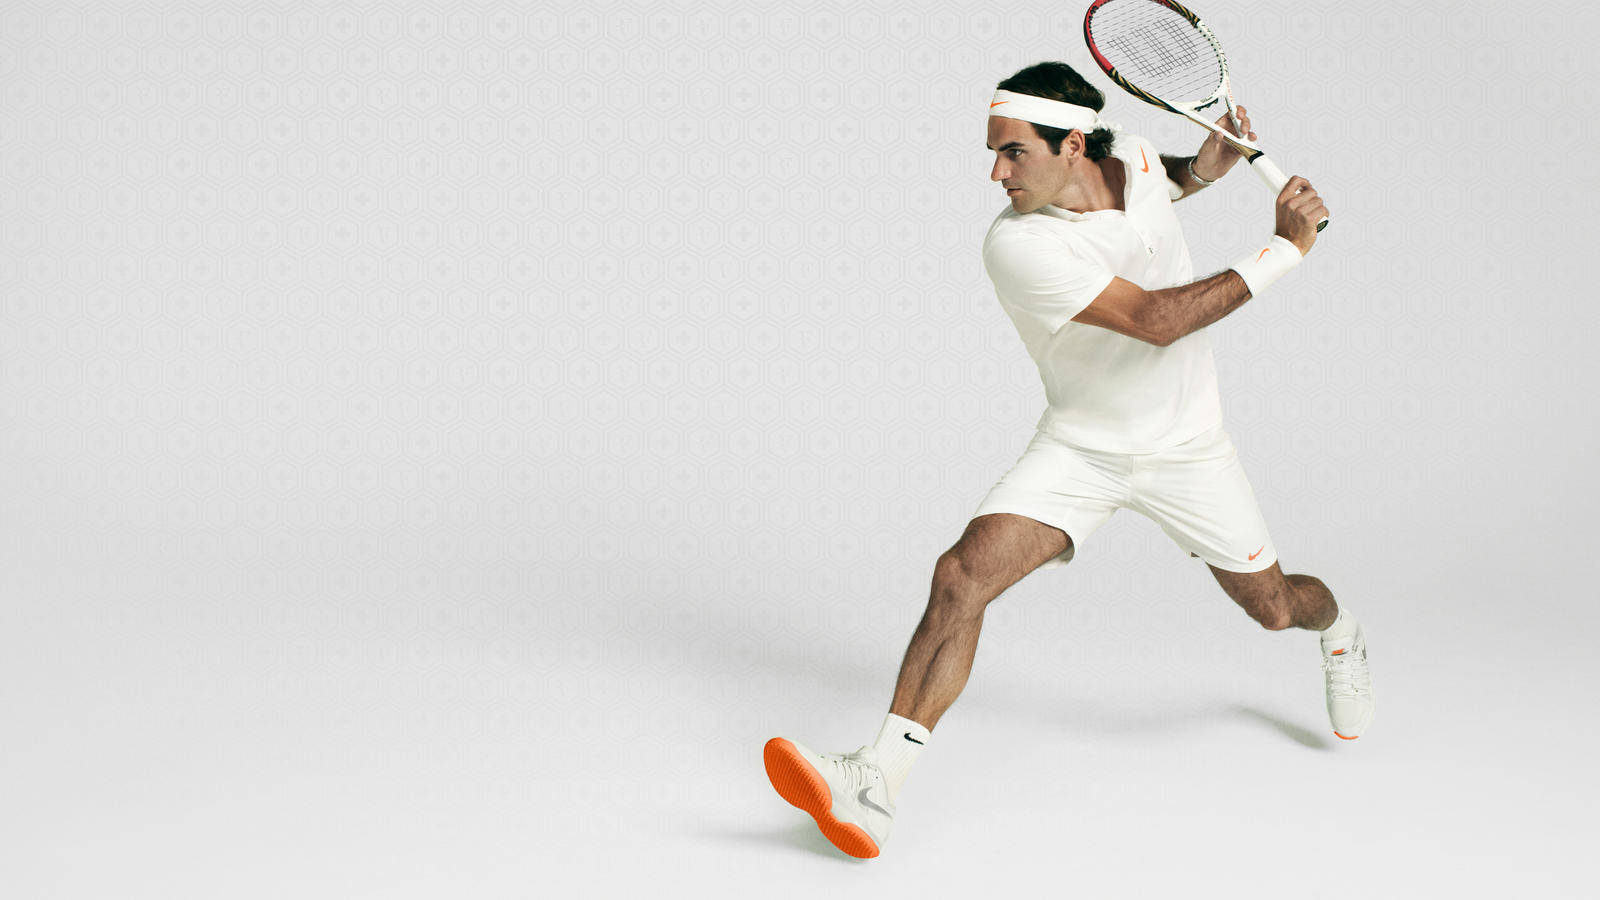 Roger Federer Showcasing His Agility On The Tennis Court. Background